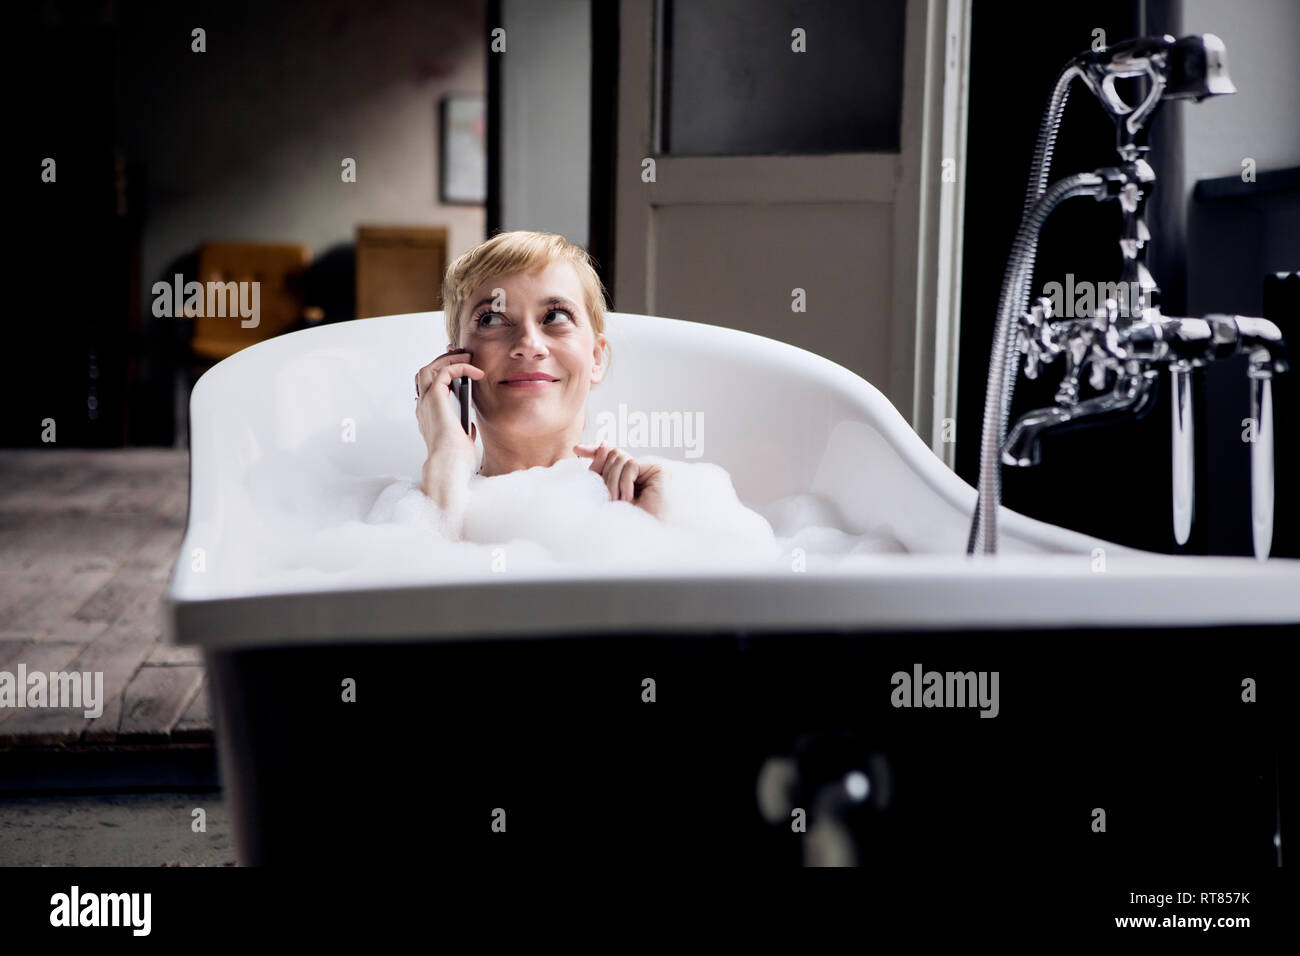 Portrait of smiling blond woman on the phone taking bubble bath in a loft Stock Photo